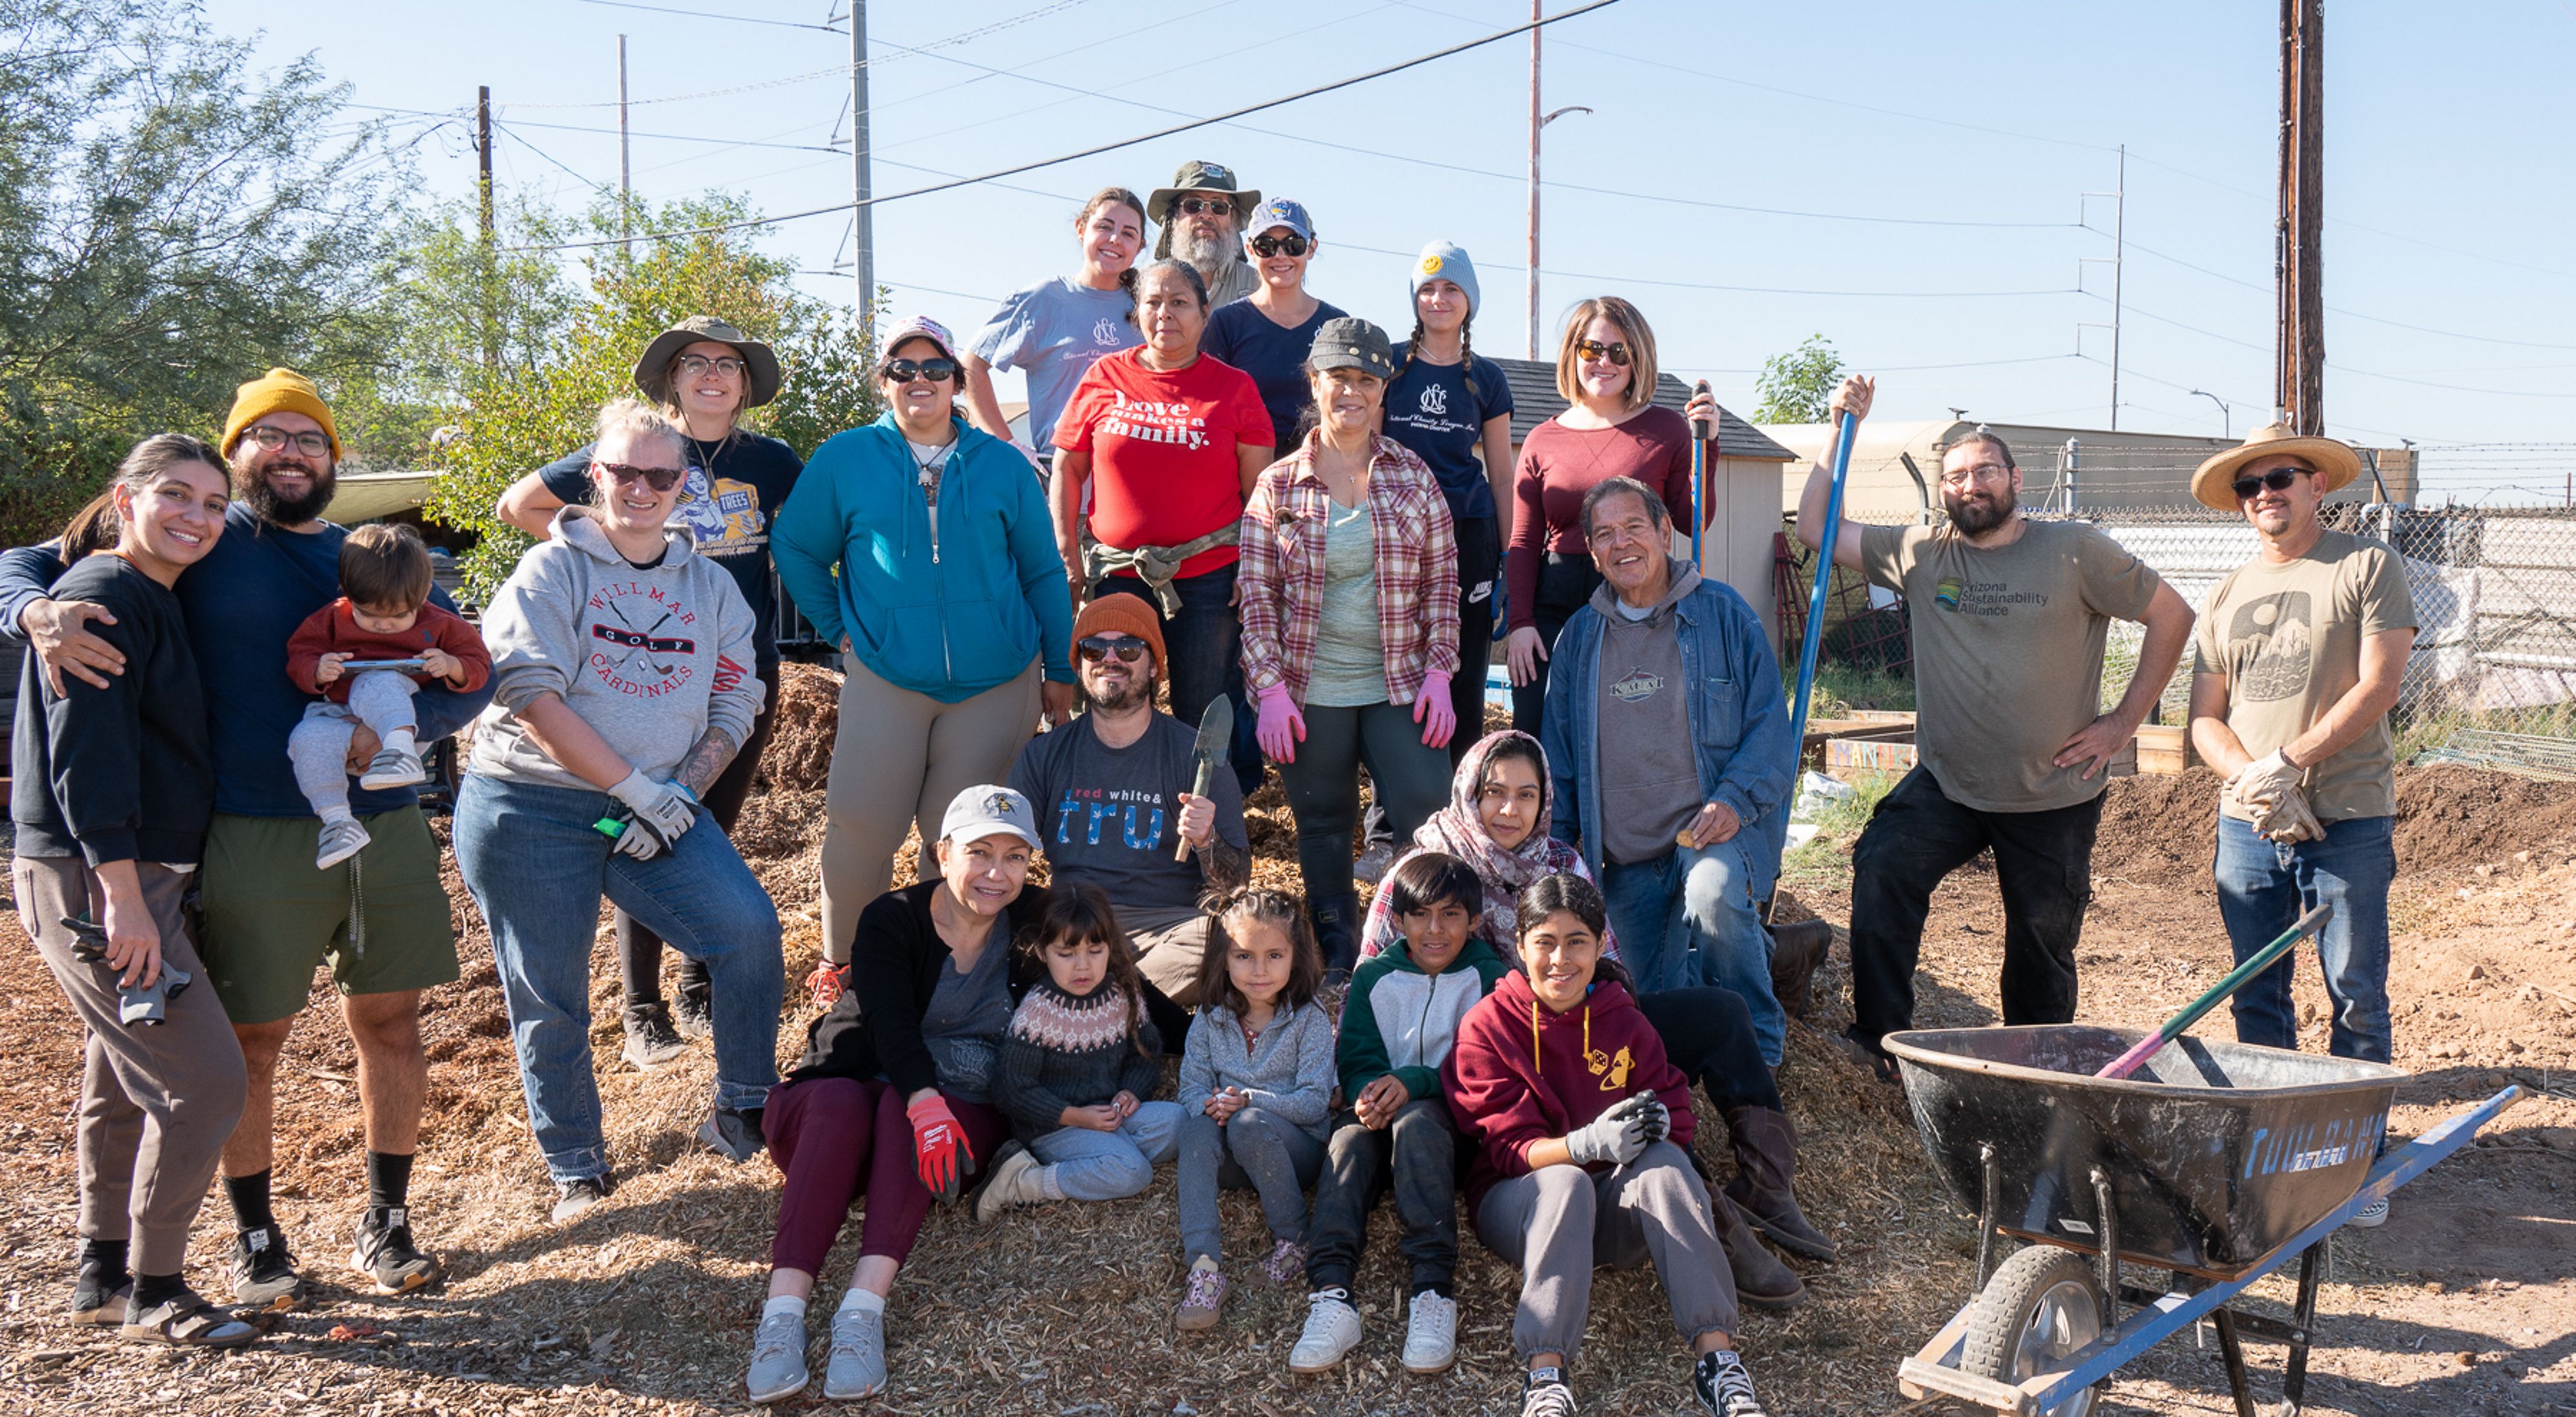 A group of volunteers pose after completing a tree planting event in Phoenix, AZ.